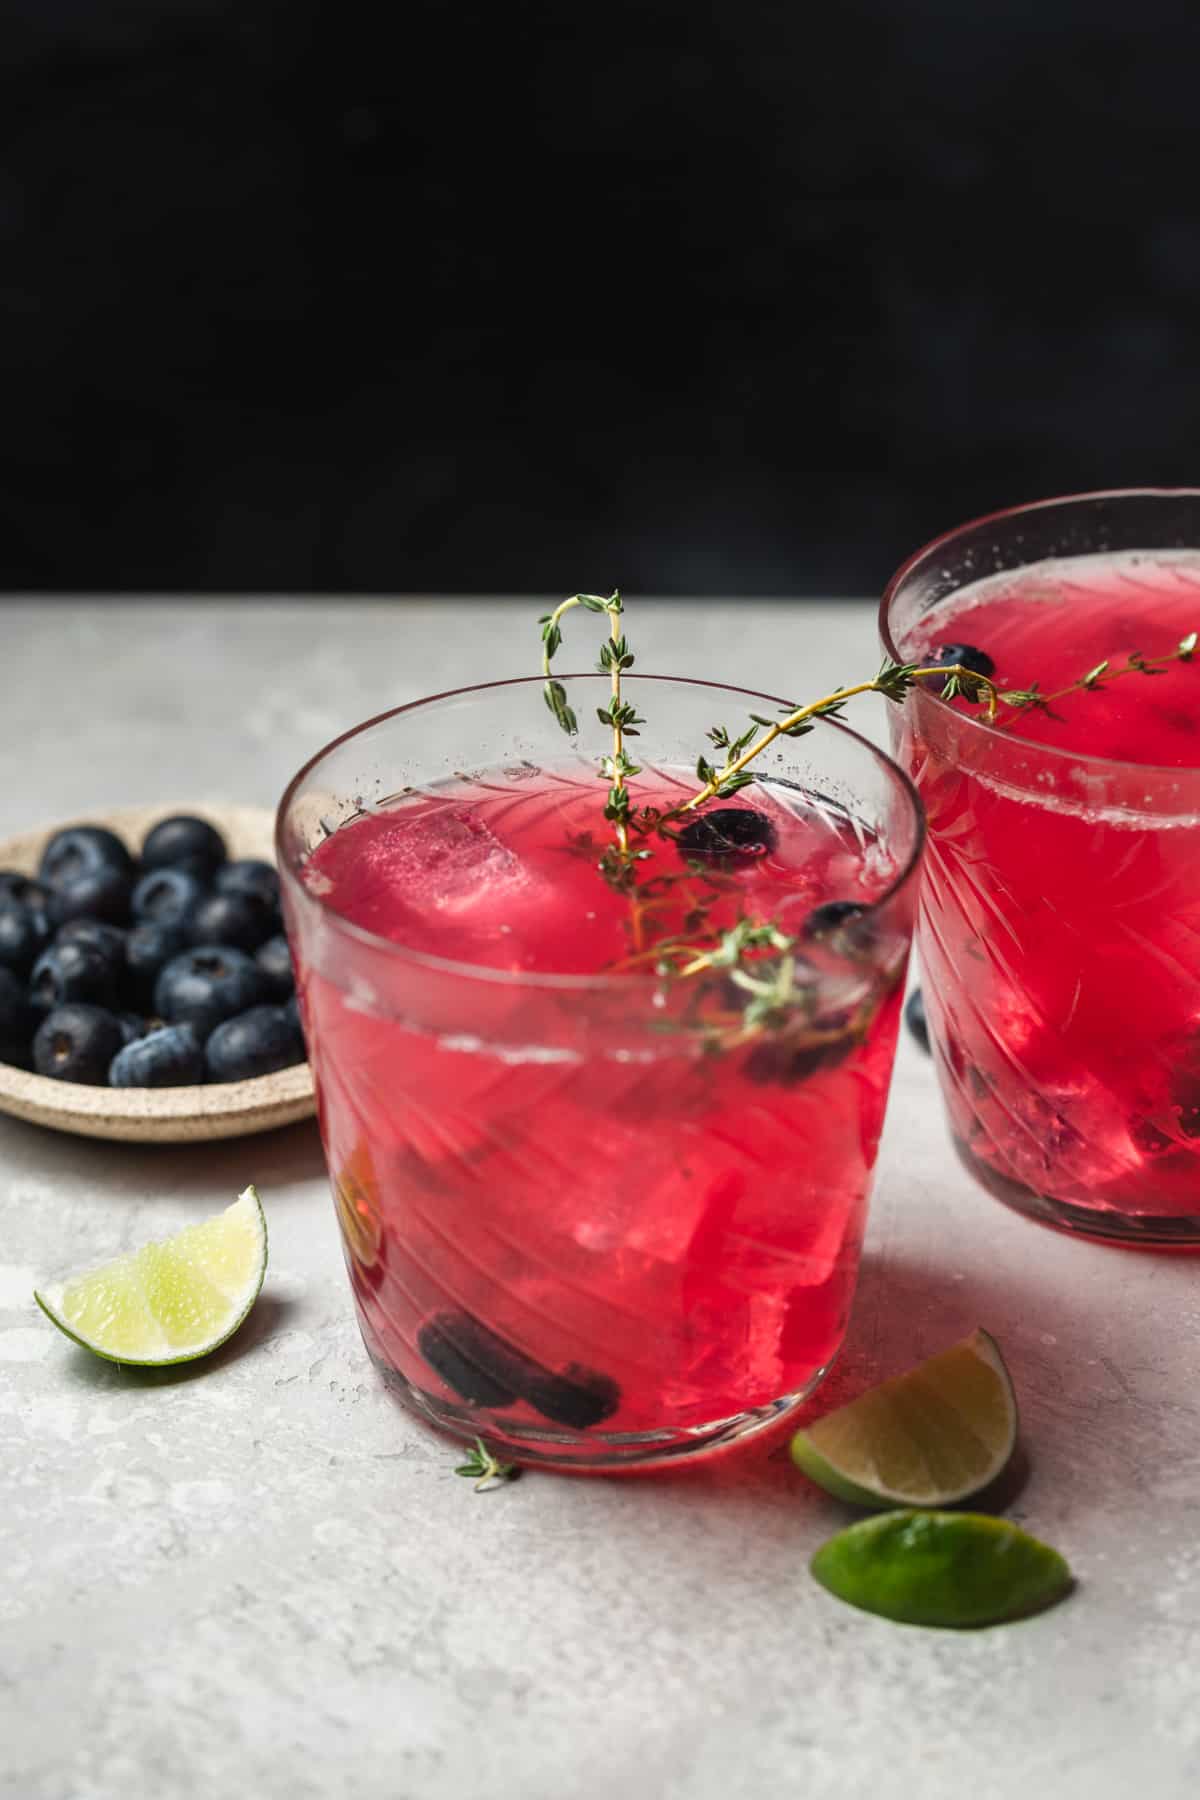 A blueberry gin and tonic cocktail in a glass garnished with blueberries and thyme.